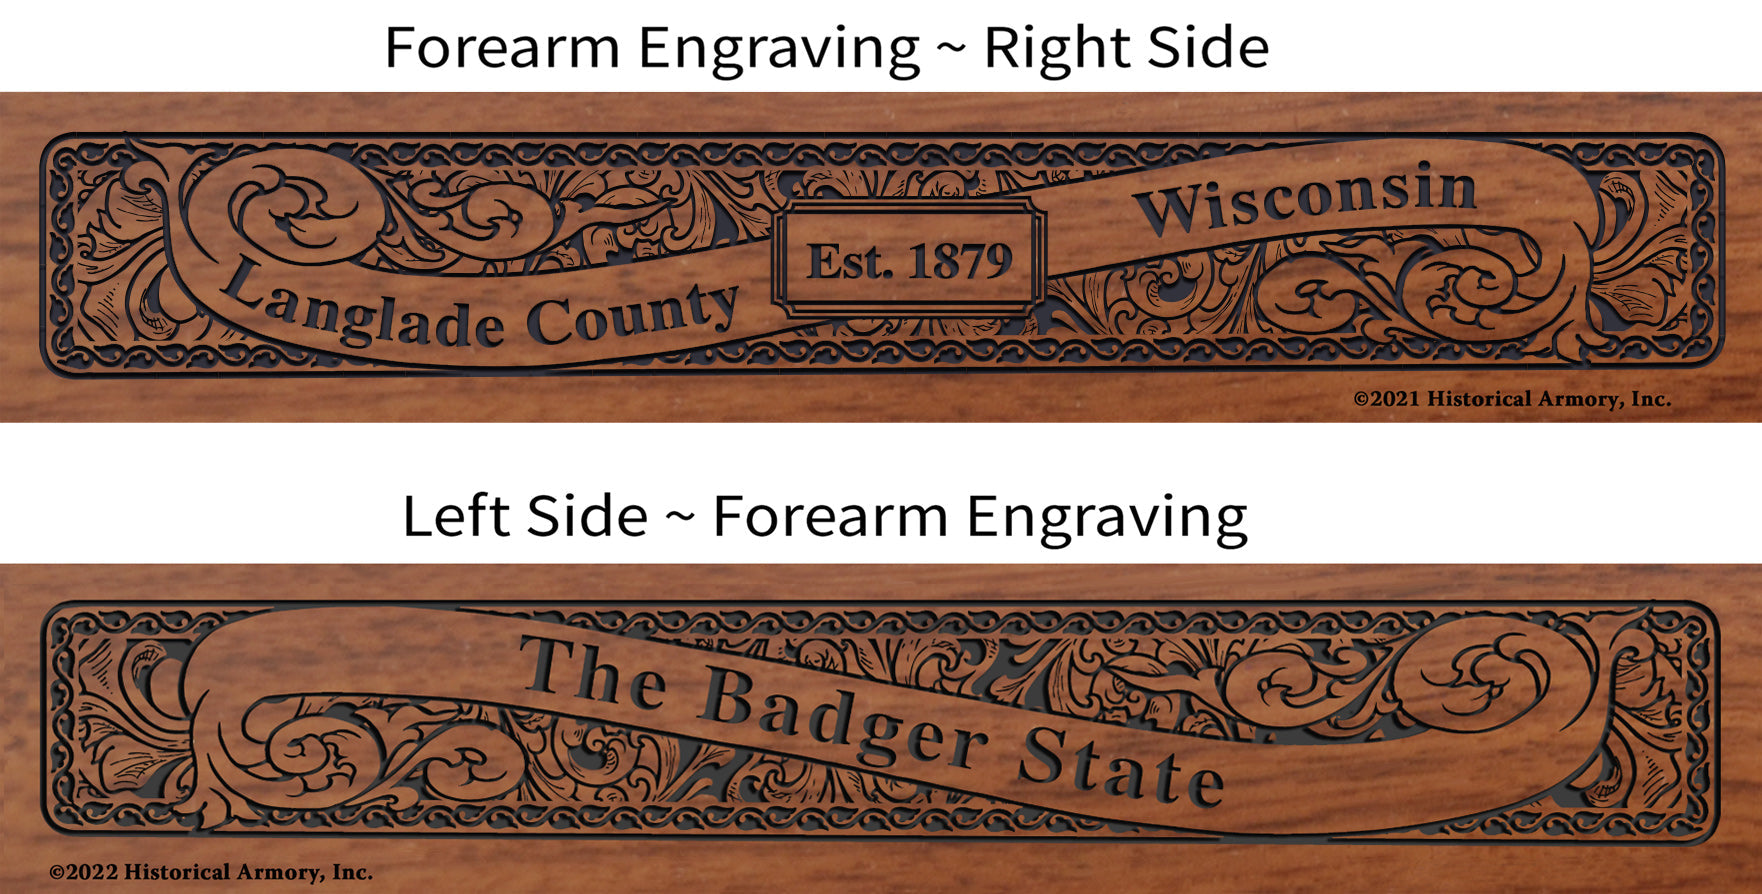 Langlade County Wisconsin Engraved Rifle Forearm